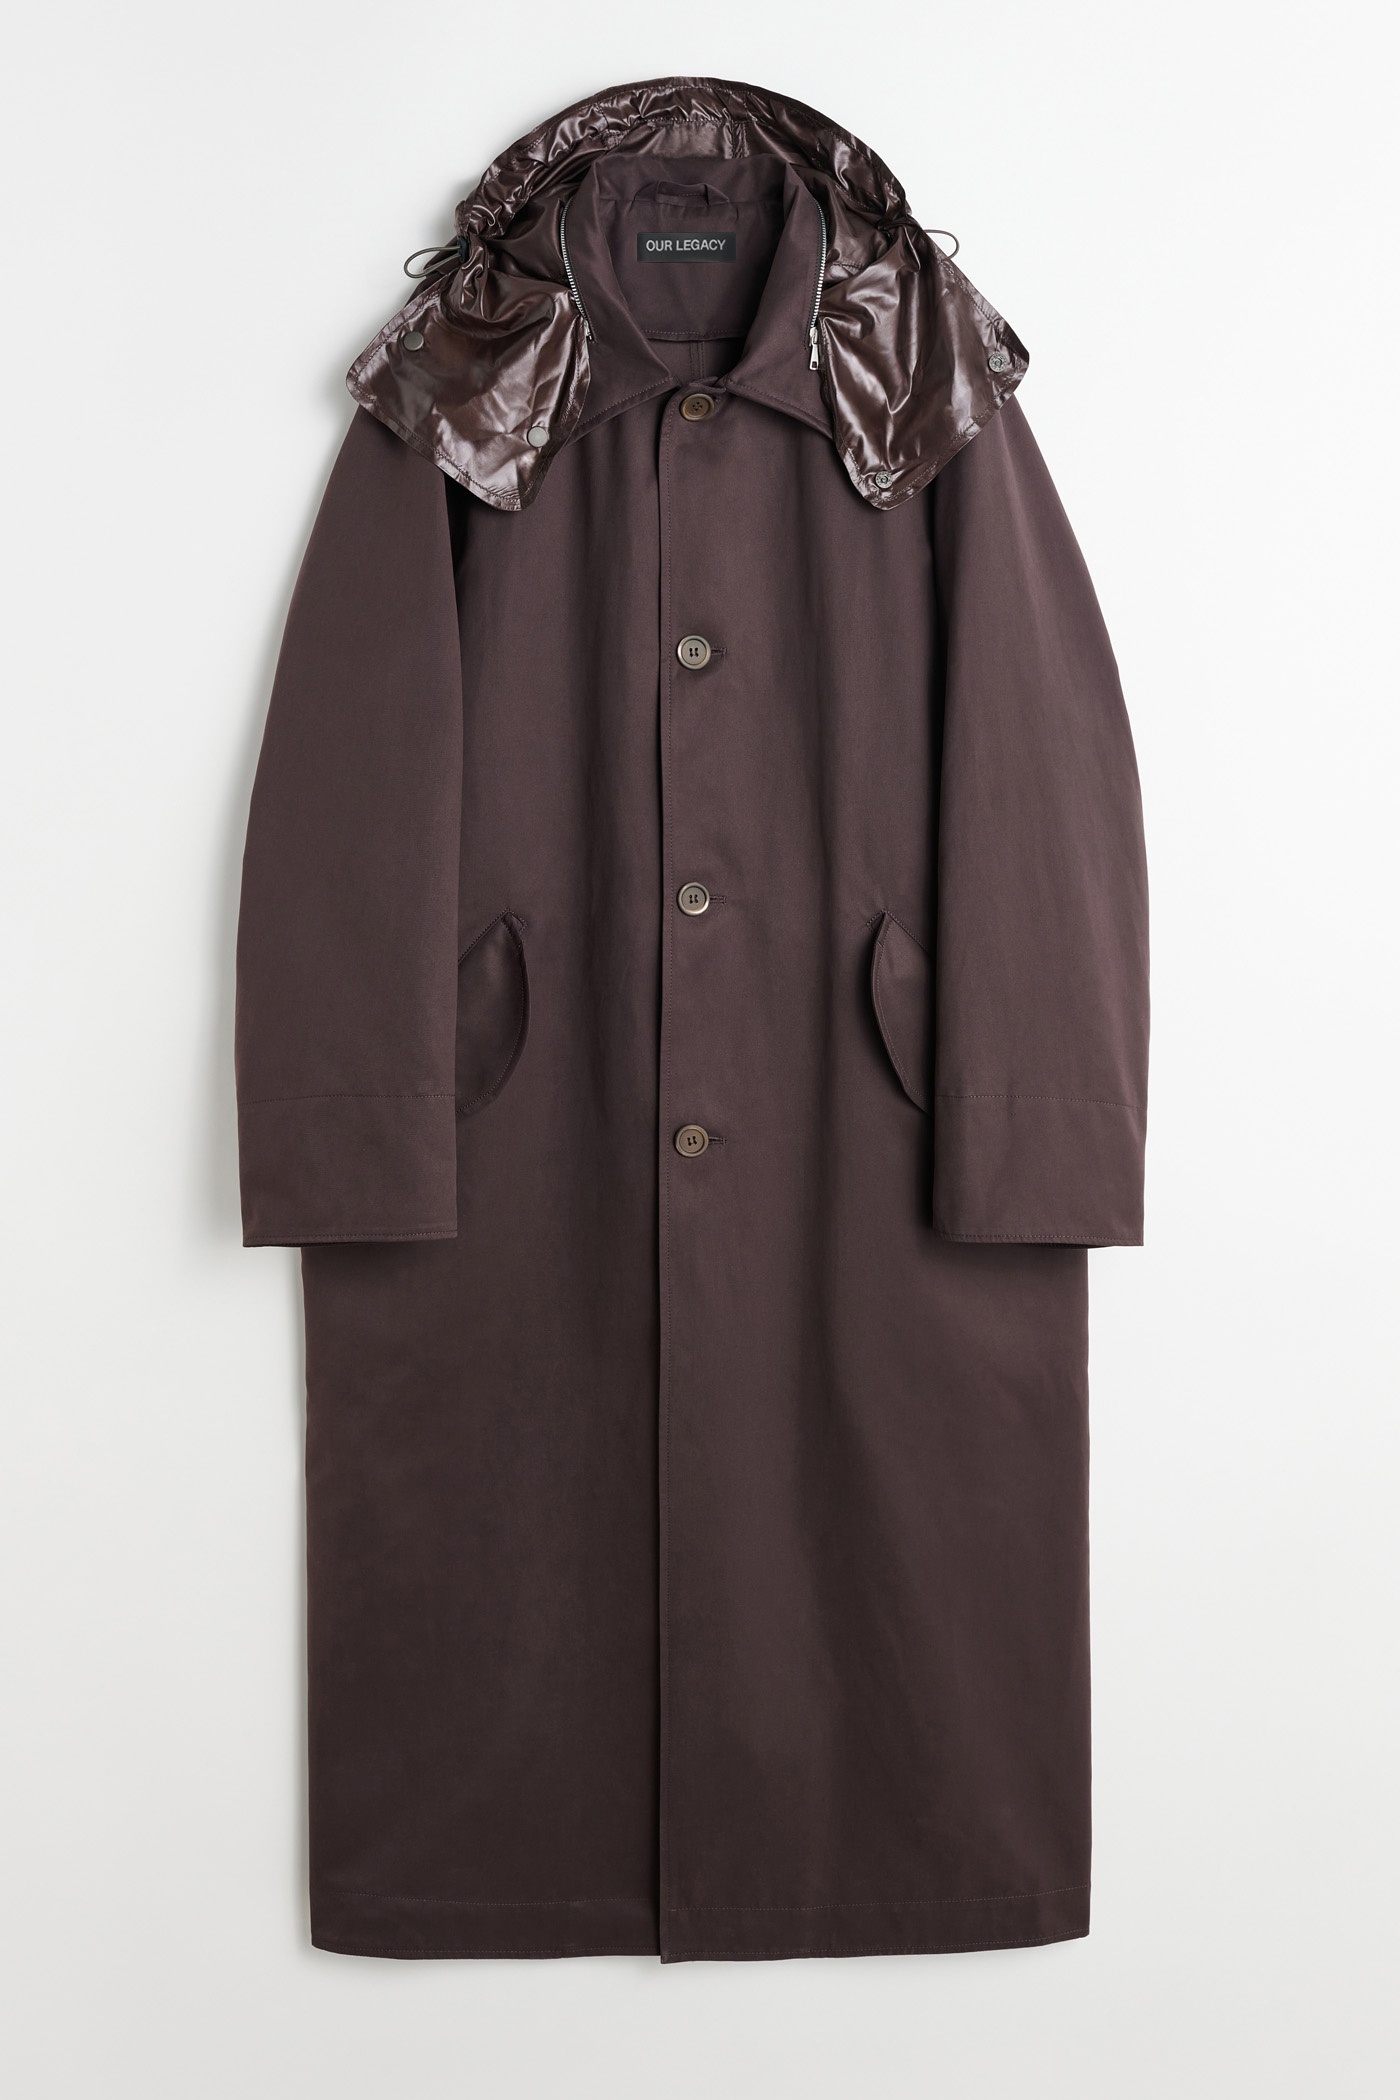 Emerge Coat Profound Brown Peached Tech - 1